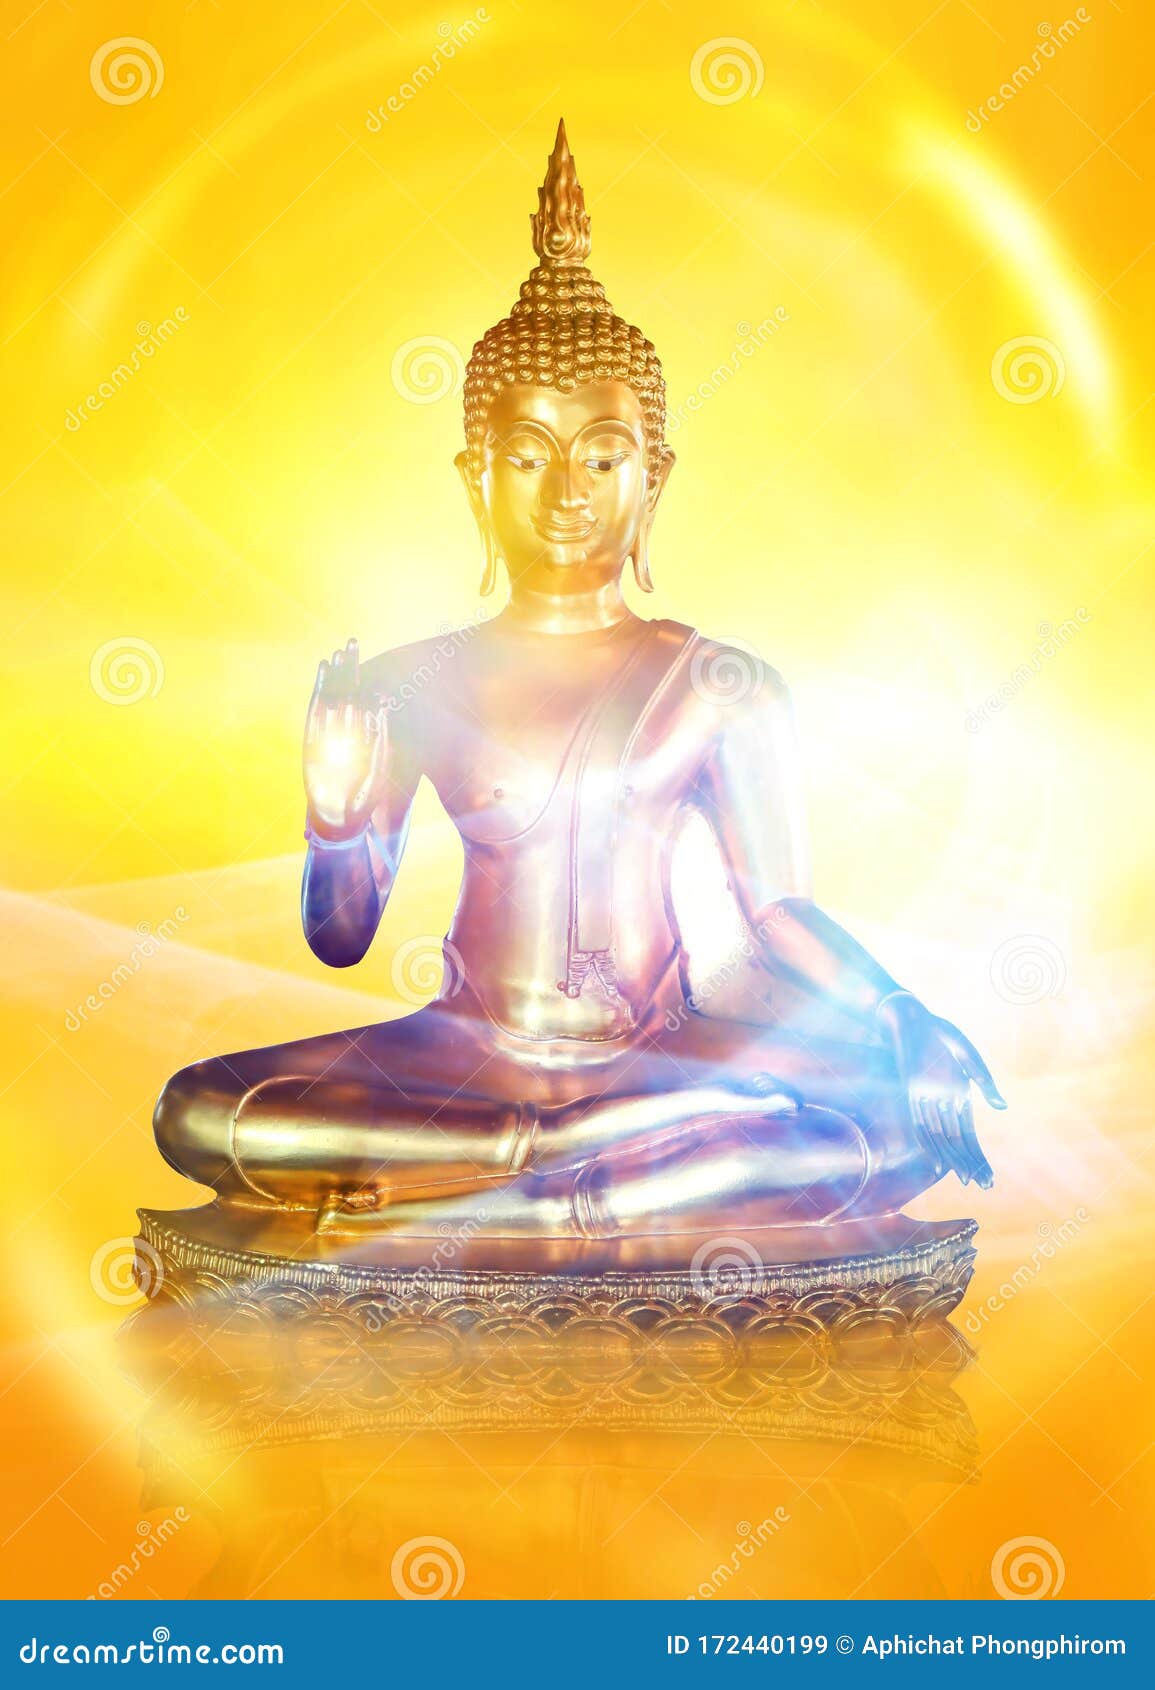 Golden Buddha Statue with Glittering Aura on a Golden Yellow Background for  Design and a Beautiful Background. Stock Image - Image of beautiful, faith:  172440199